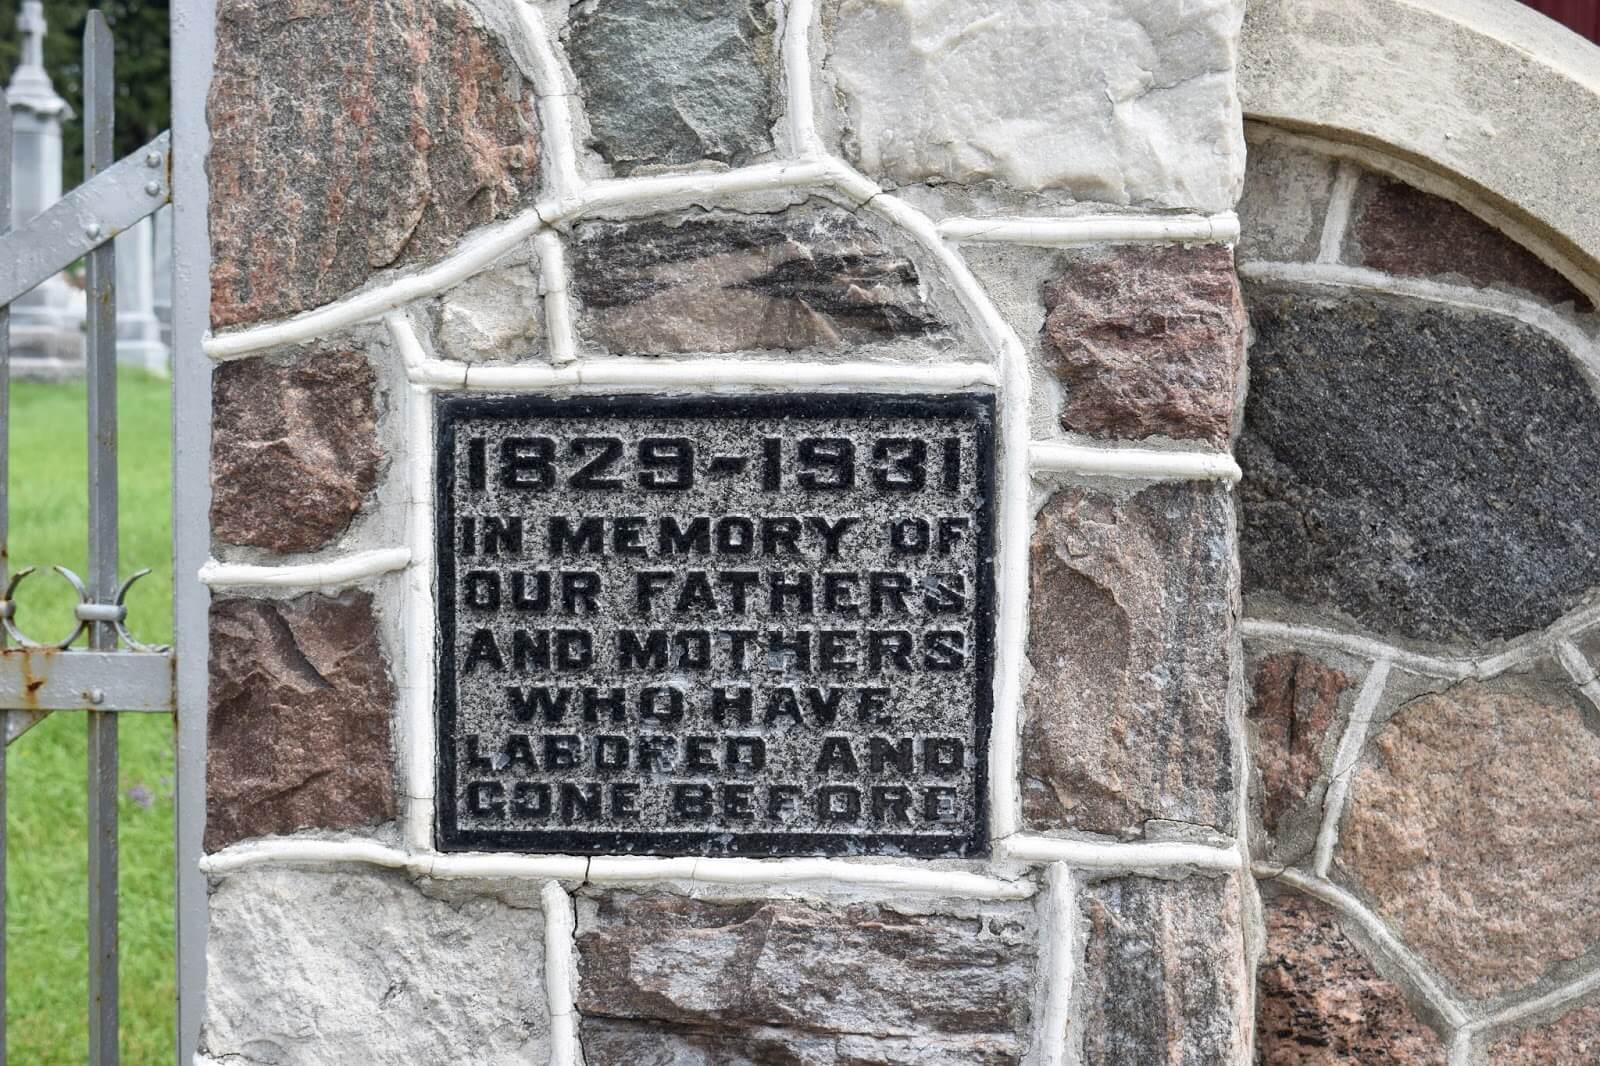 A plaque stating 1829-1931, In memory of our fathers and mothers who have labored and gone before.